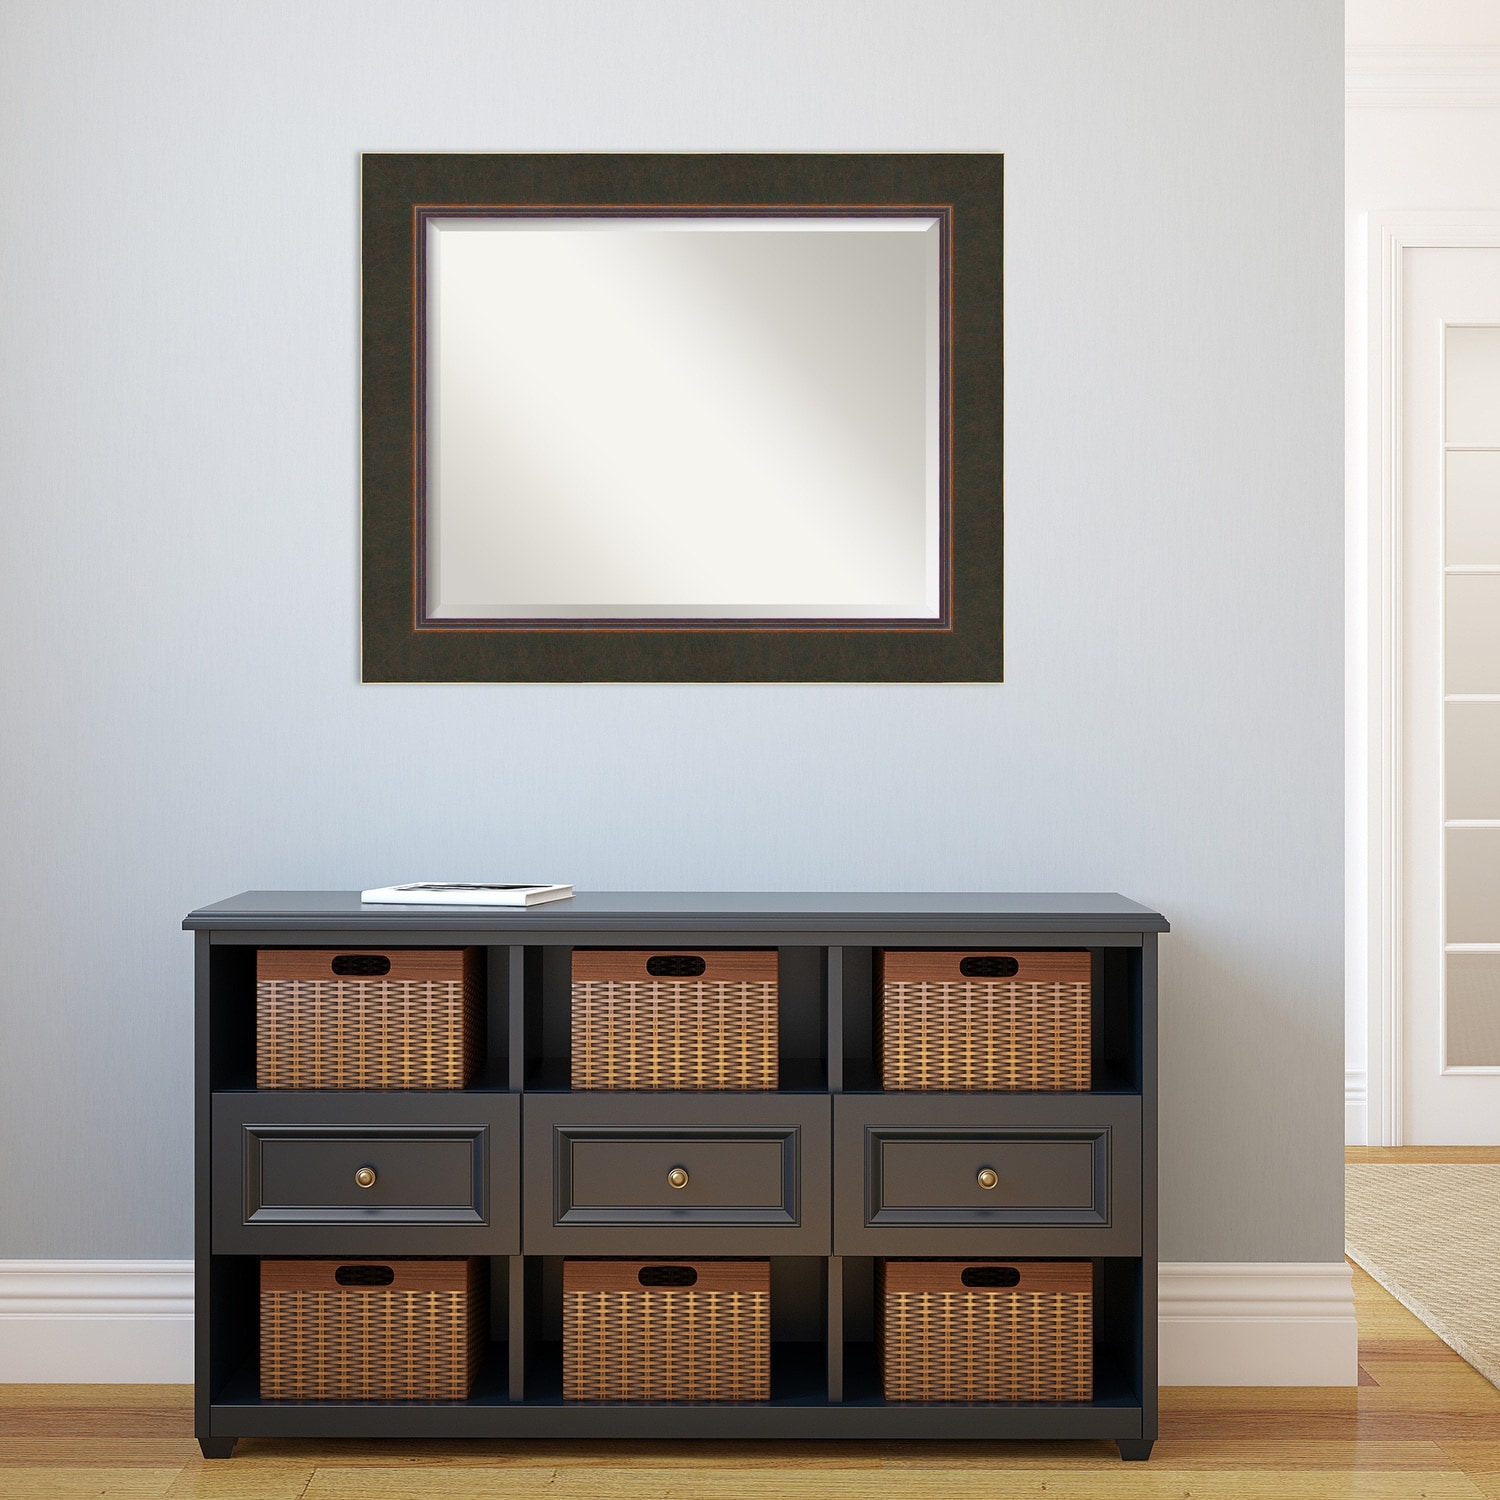 Beveled Wood Wall Mirror - Milano Bronze Frame - Outer Size: 34 x 28 in